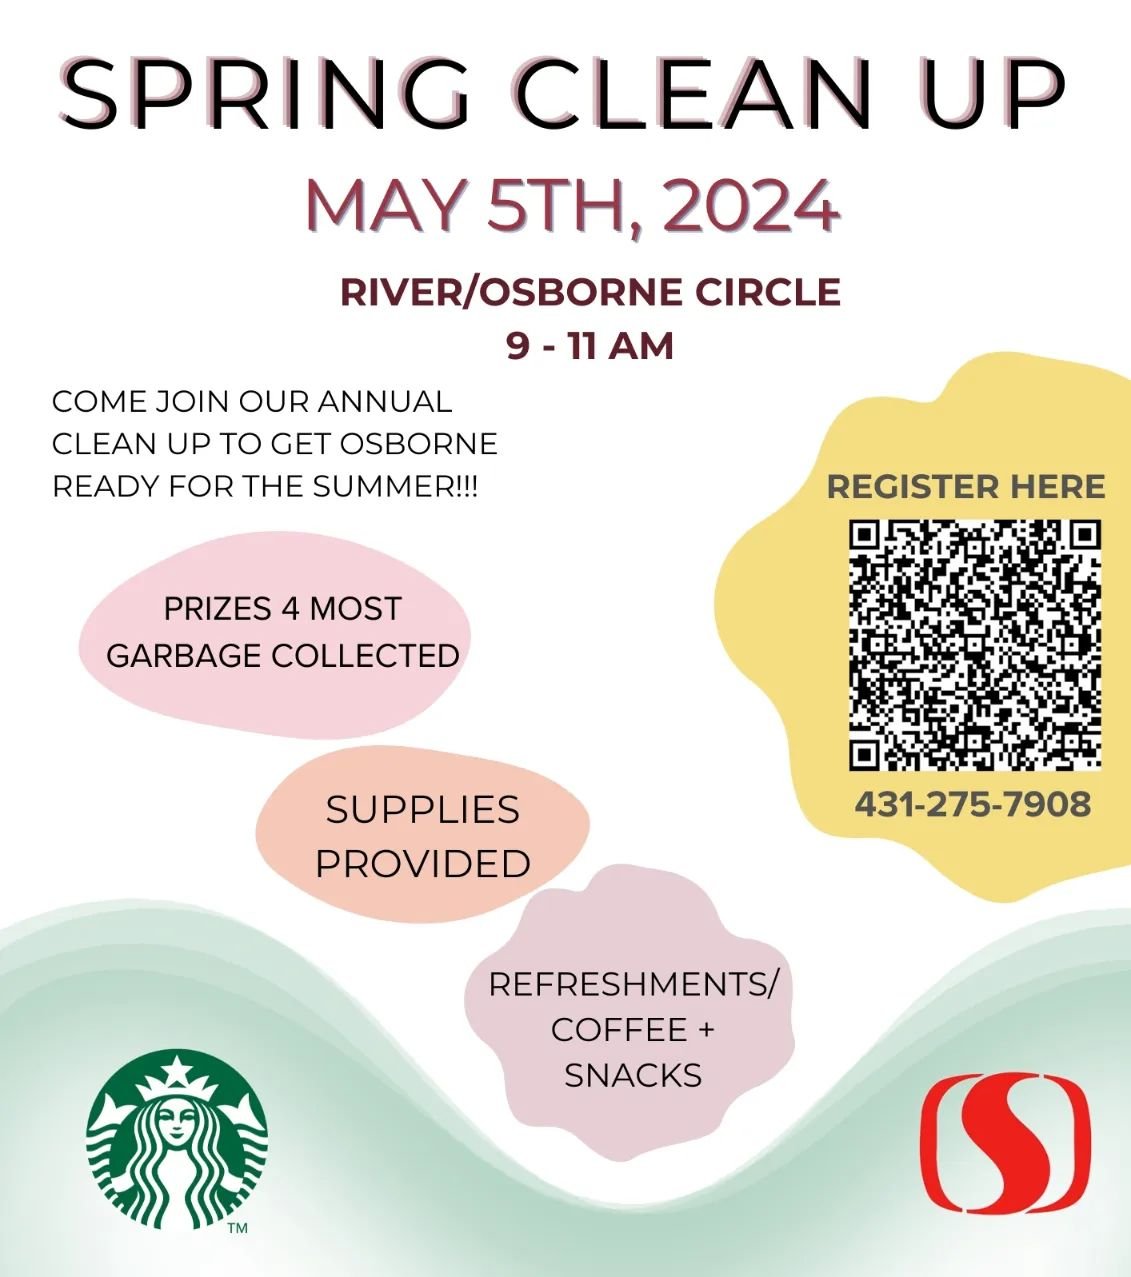 Come join us for our annual spring clean up this Sunday from 9-11 AM! Link to sign up in bio!